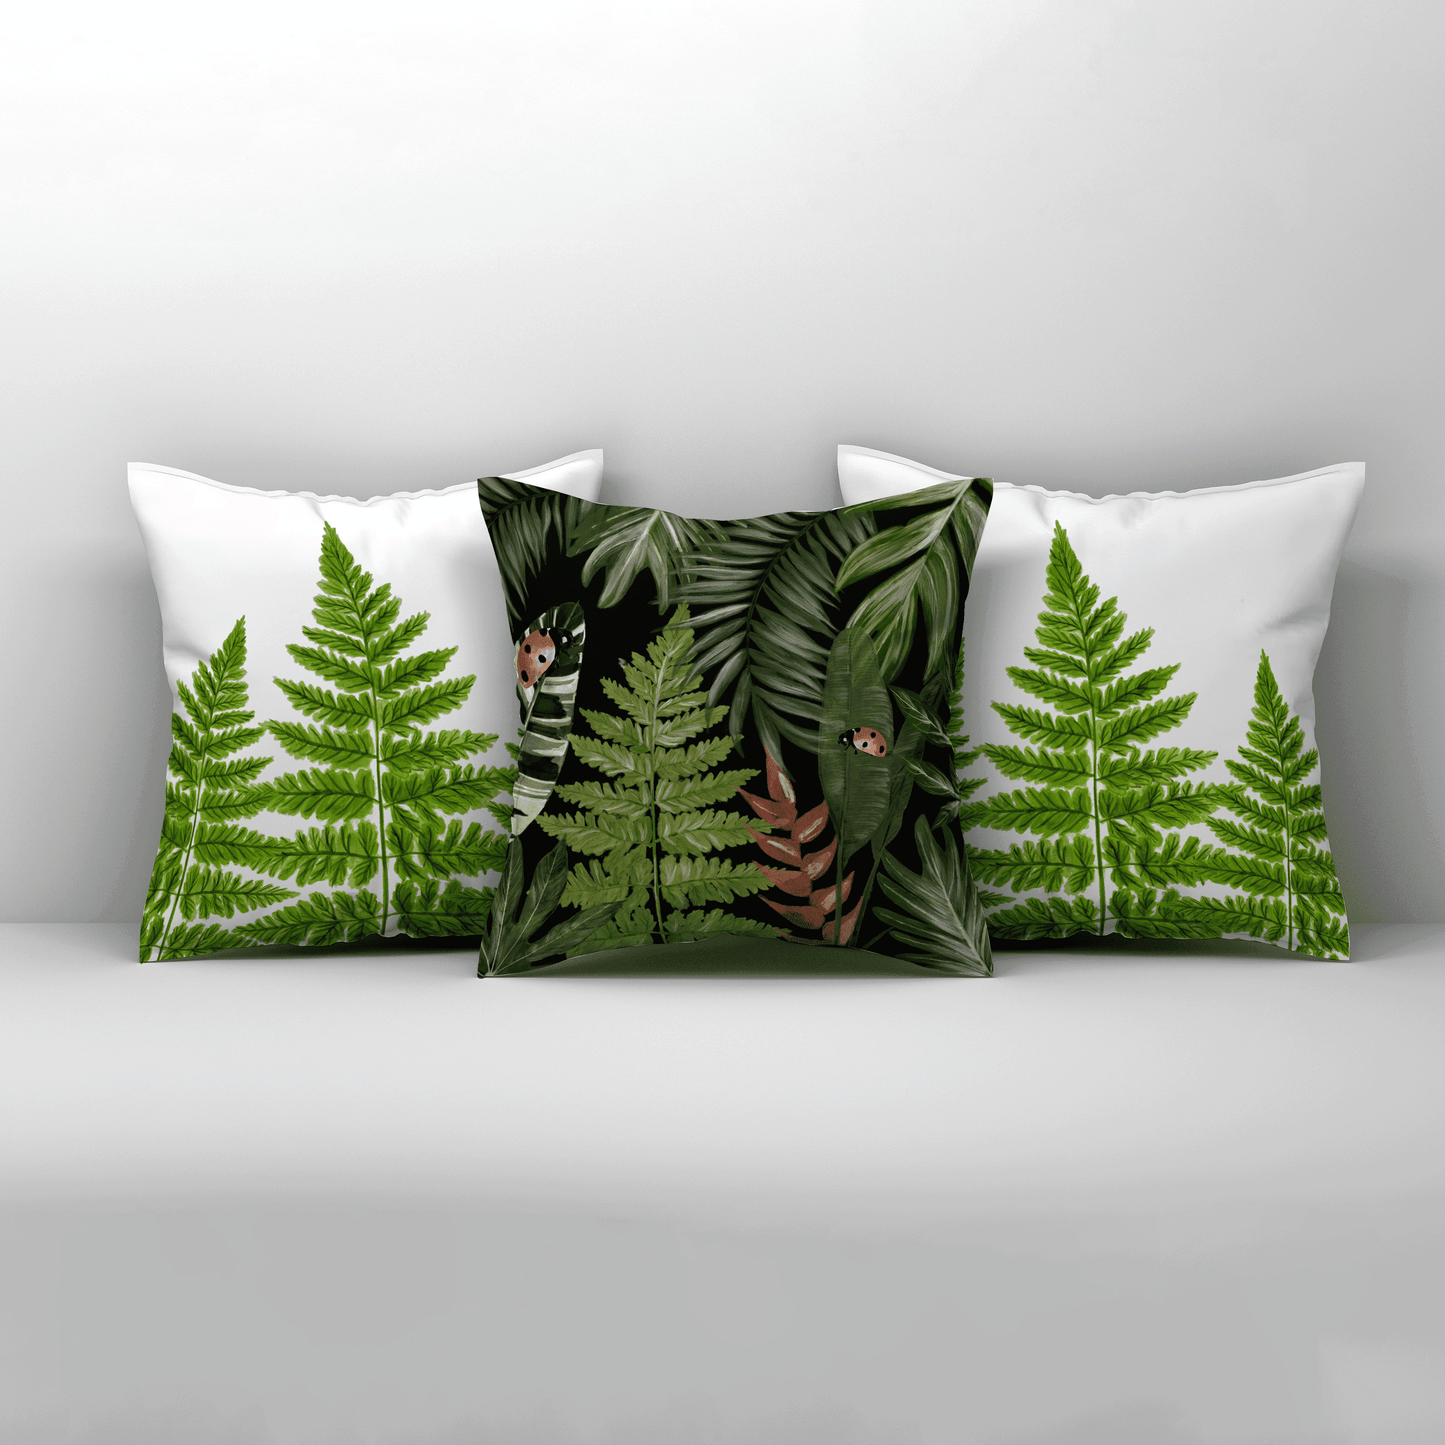 Our Lady Beetle Night X Fern in Bloom | Set of 3